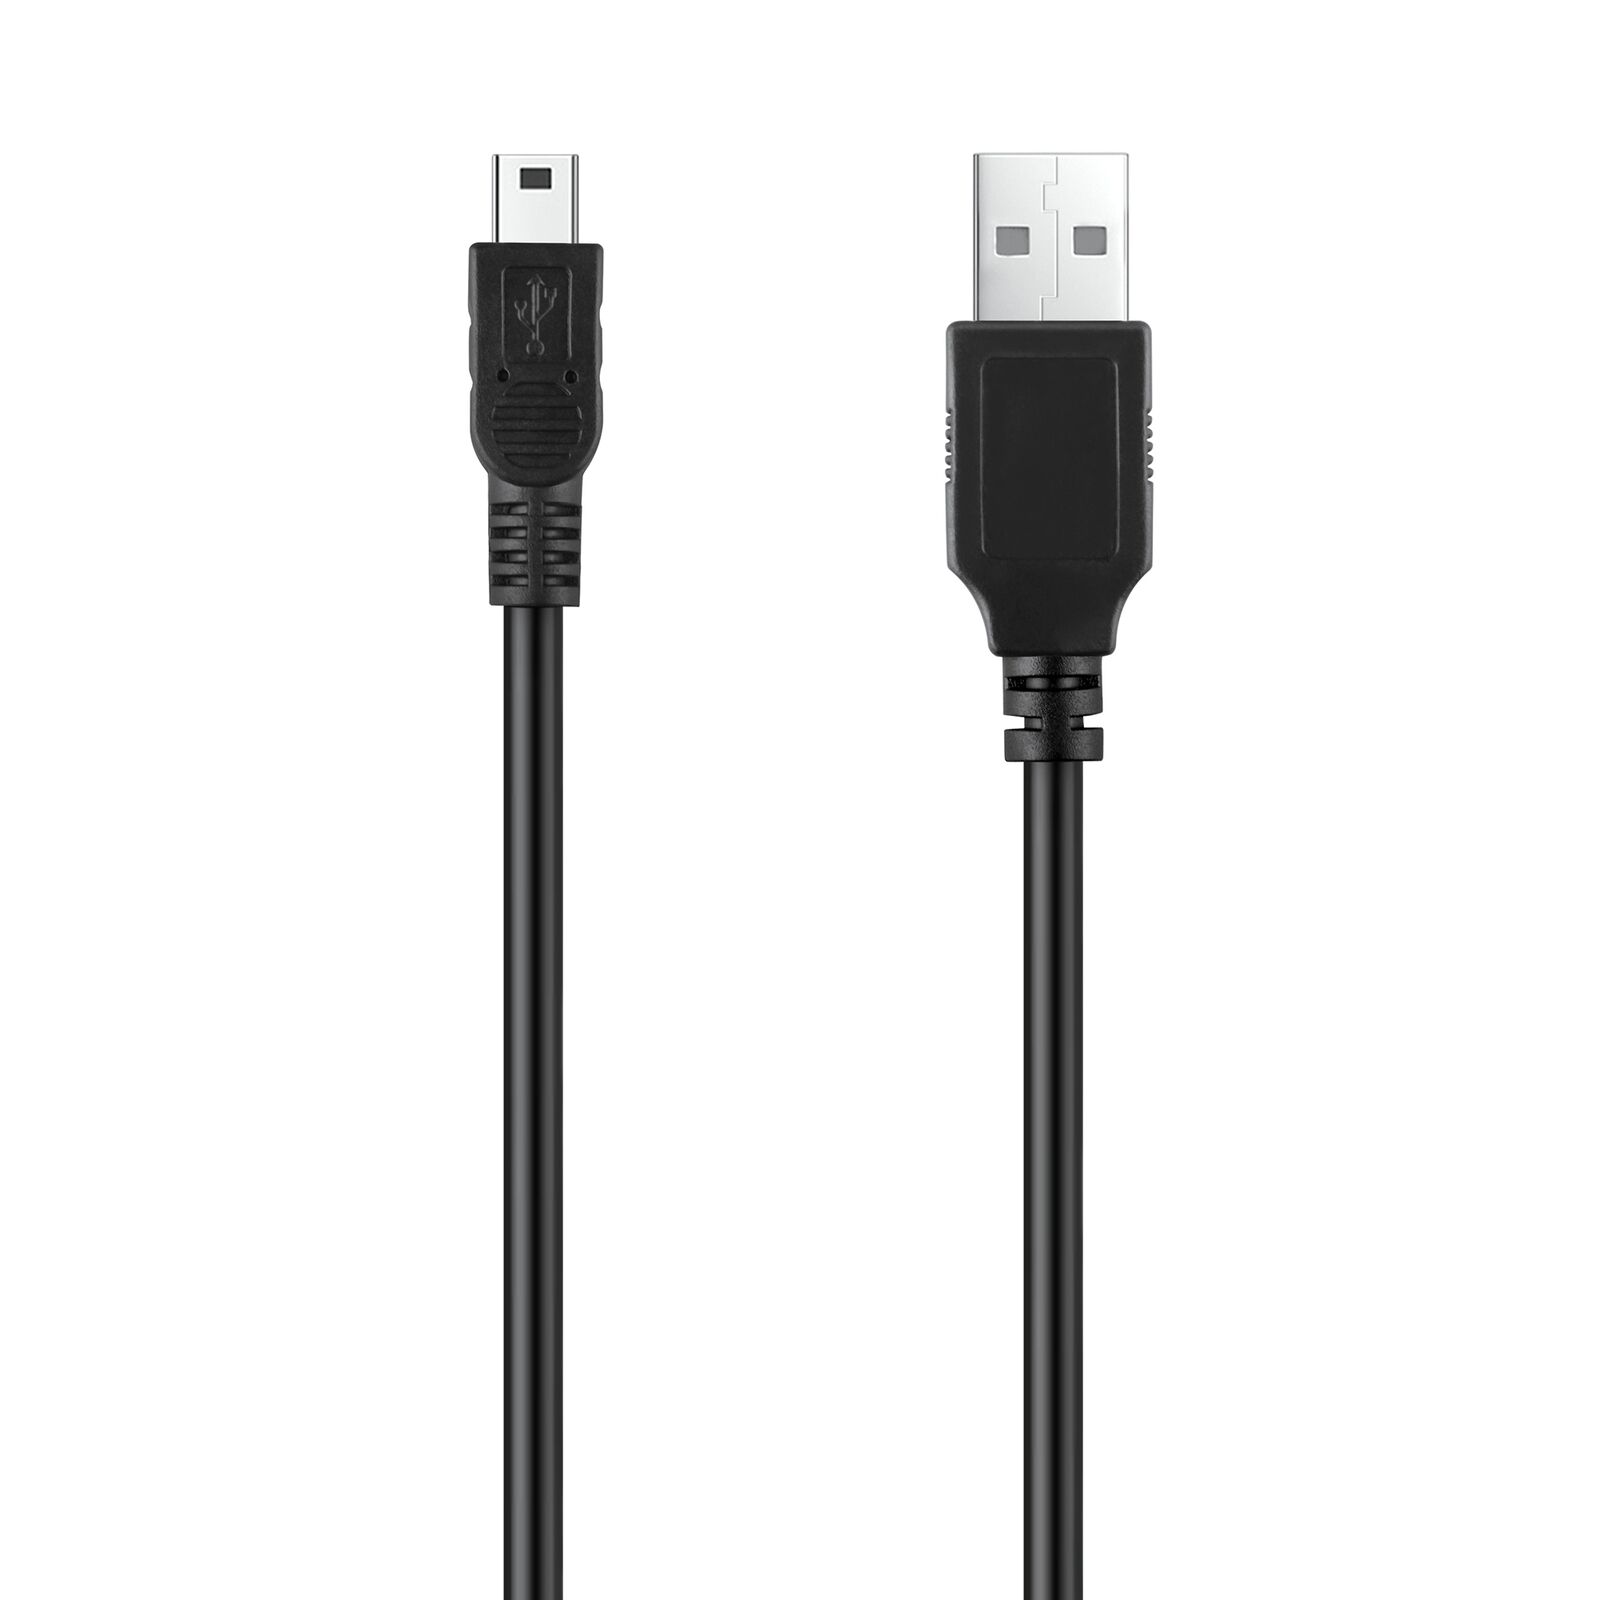 5ft USB Charging Cable Cord for Uniden BC125AT BC75XLT BC-125AT BC-75XLT Scanner